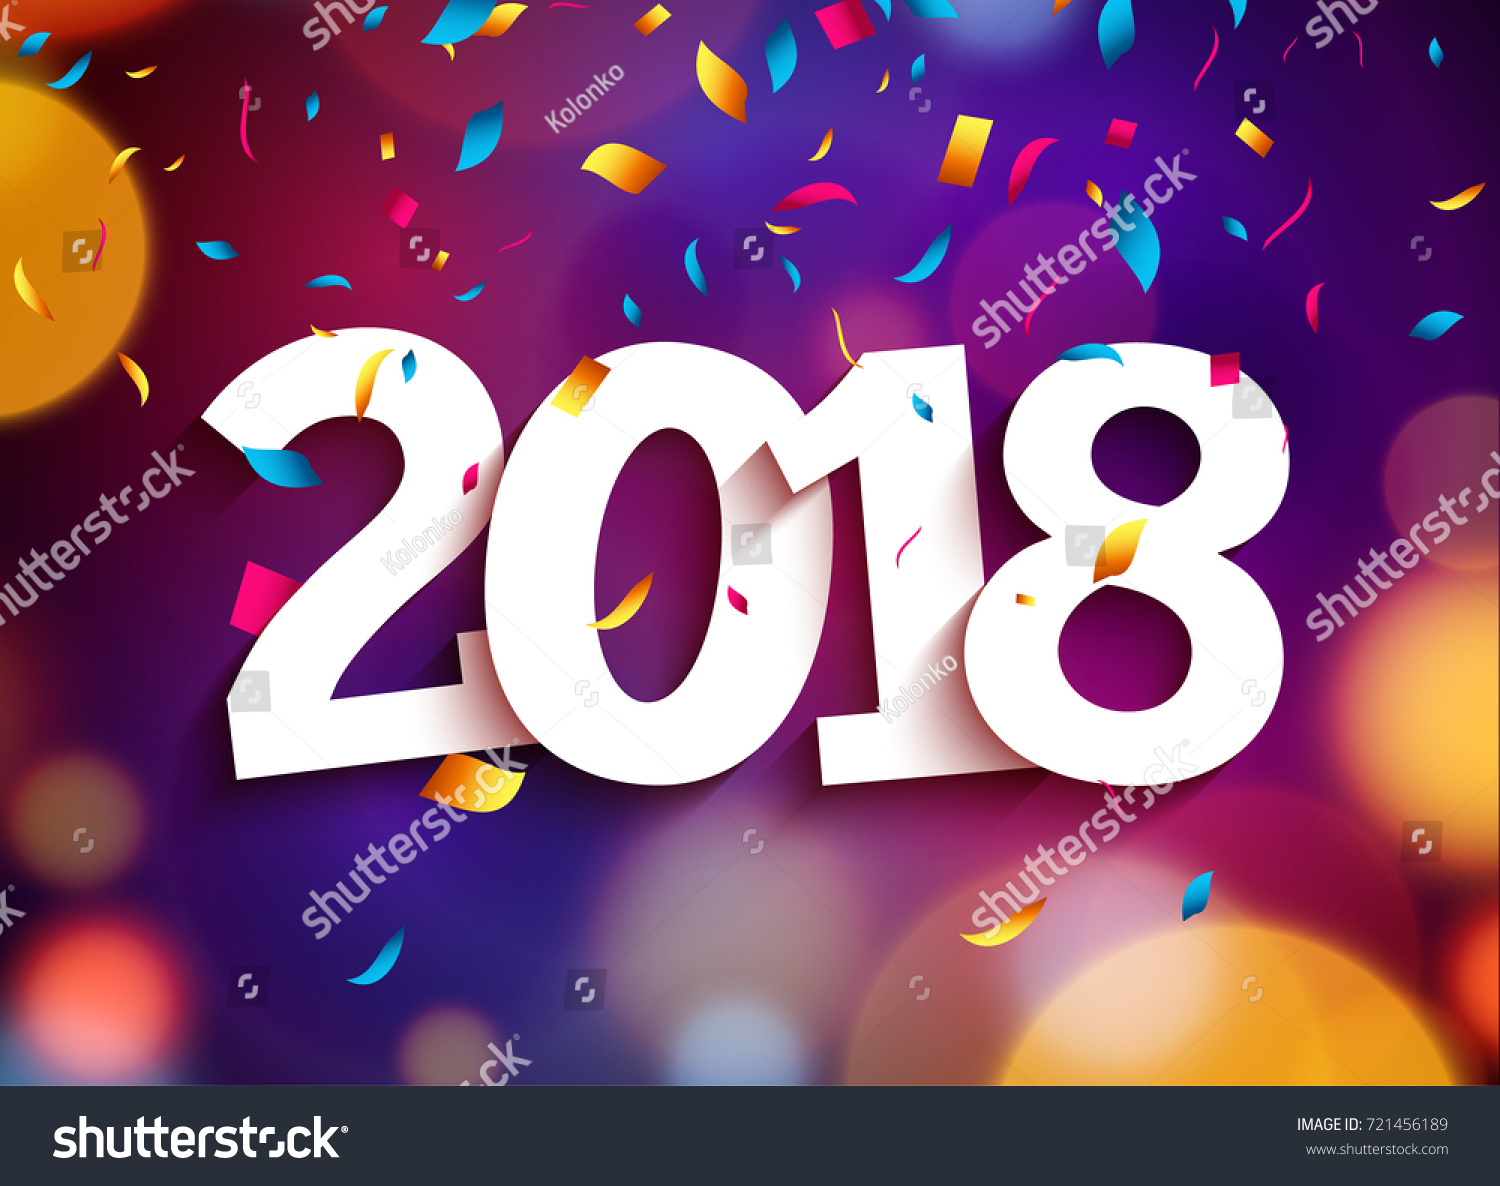 Happy New Year 2018 background decoration. Greeting card design template 2018 confetti. Vector illustration of date 2018 year. Celebrate brochure or flyer. #721456189